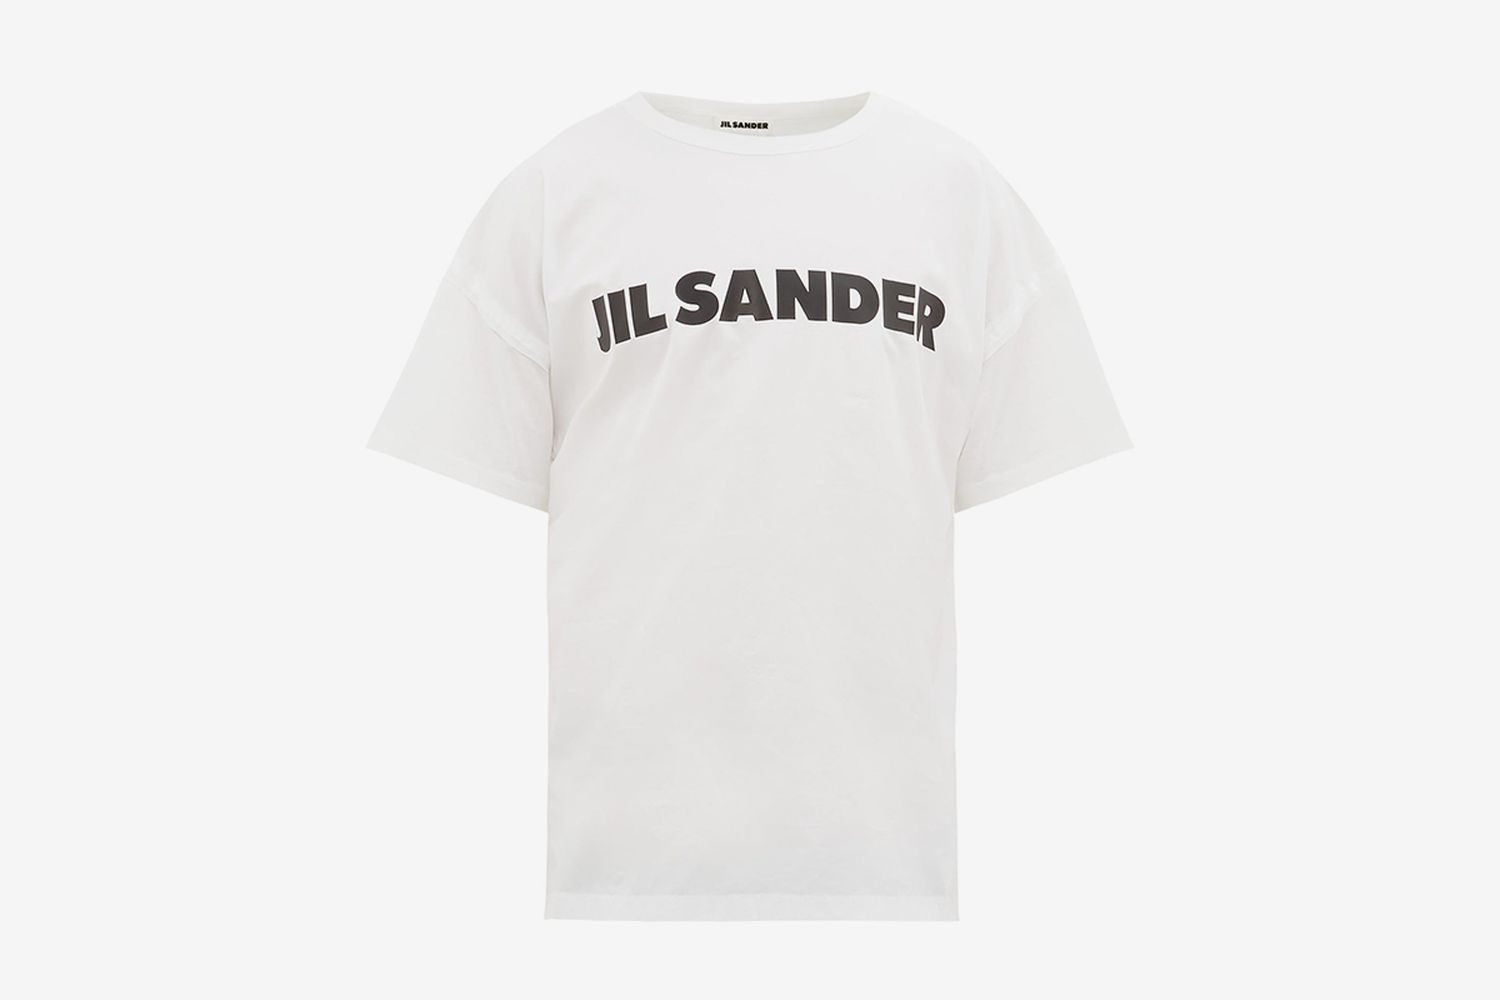 Our Jil Sander SS20 Highlights are Here to Shop